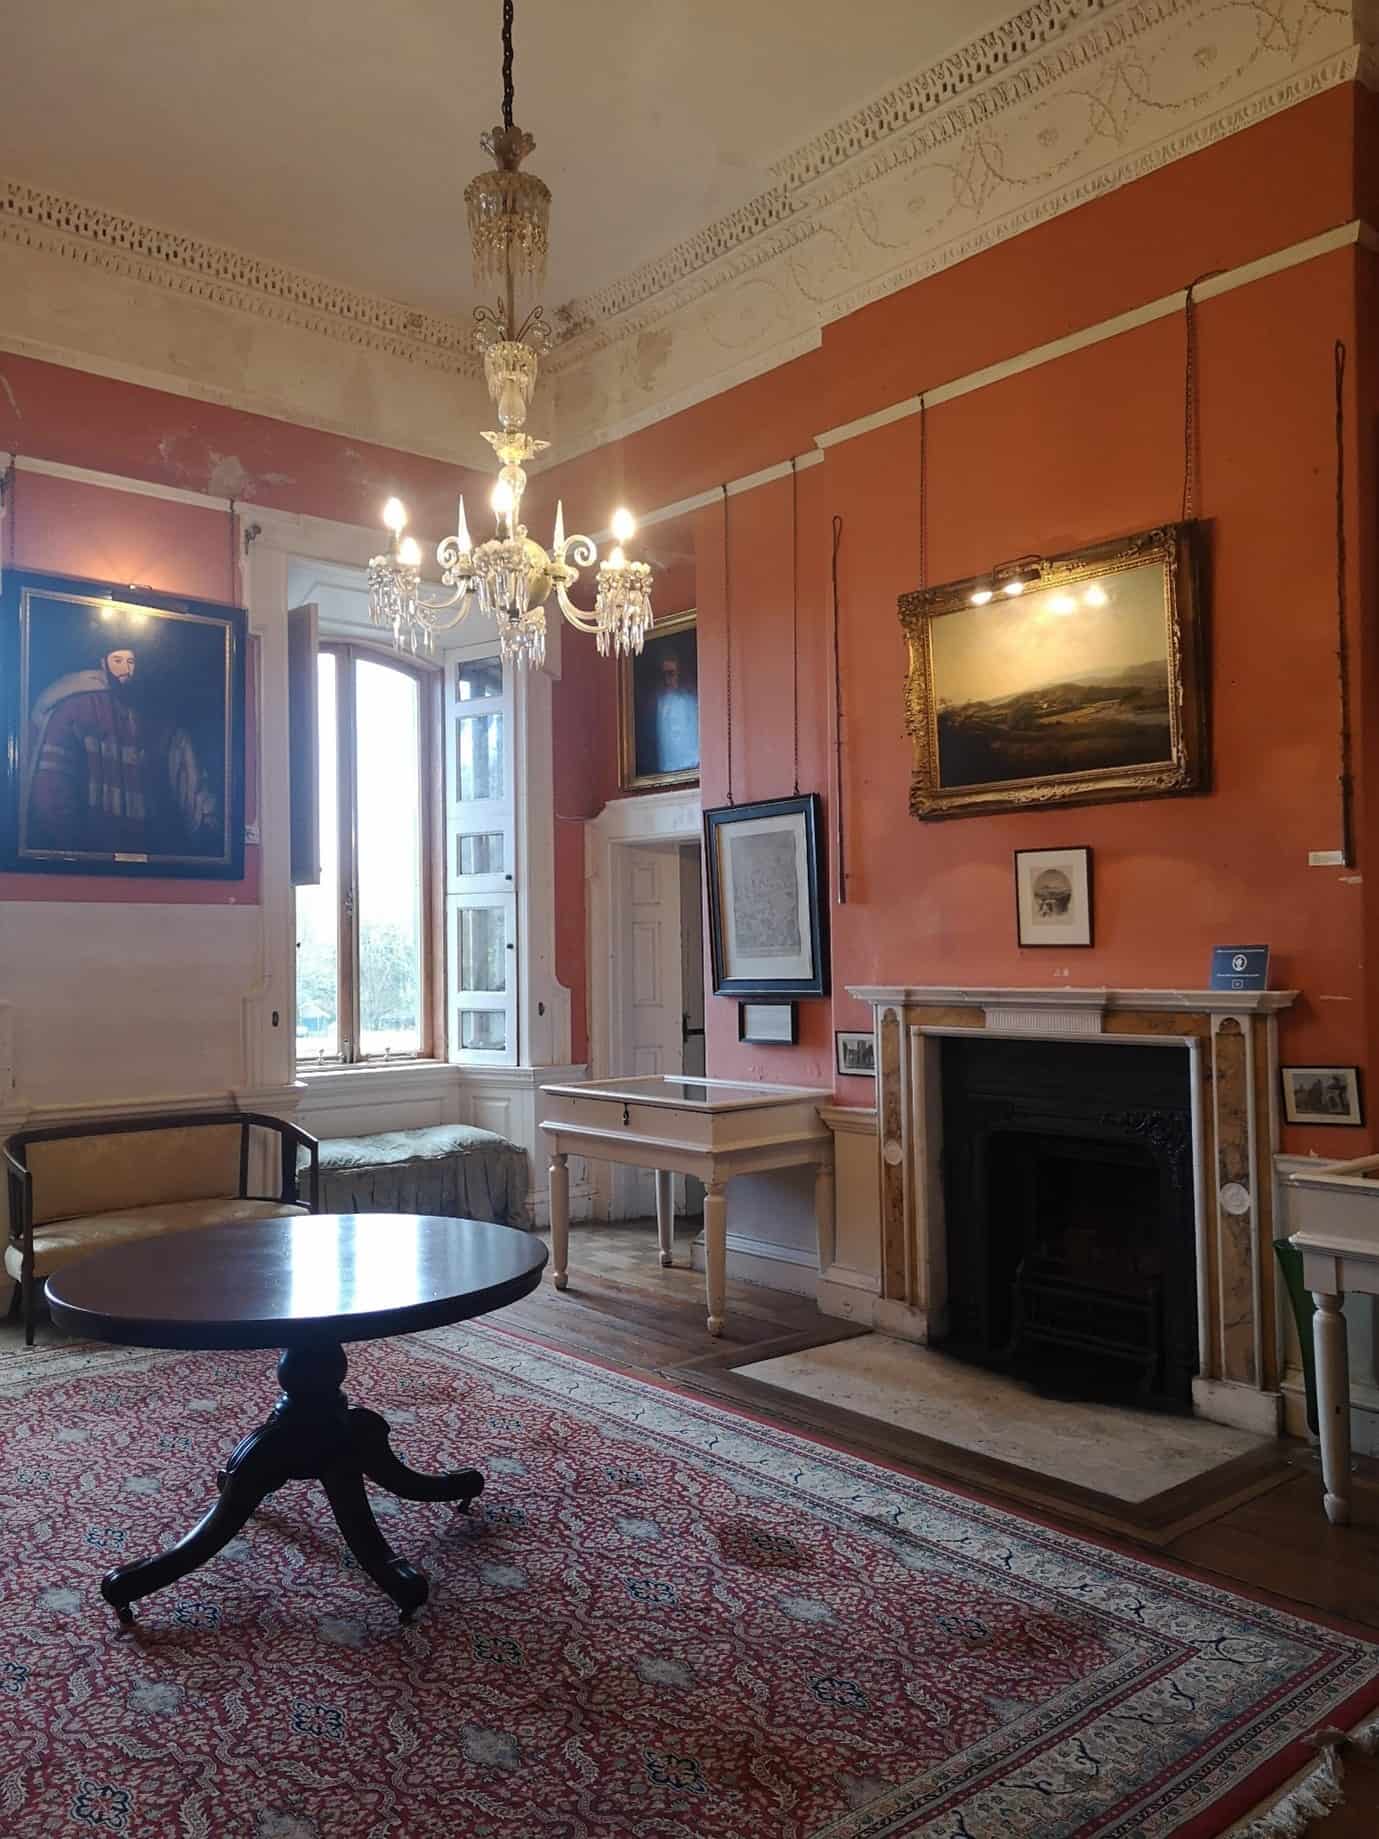 The Small Dining Room at Westport House - Howe Peter’s Coach Riding Whips either side of the J.A. O’Connor painting over the fireplace